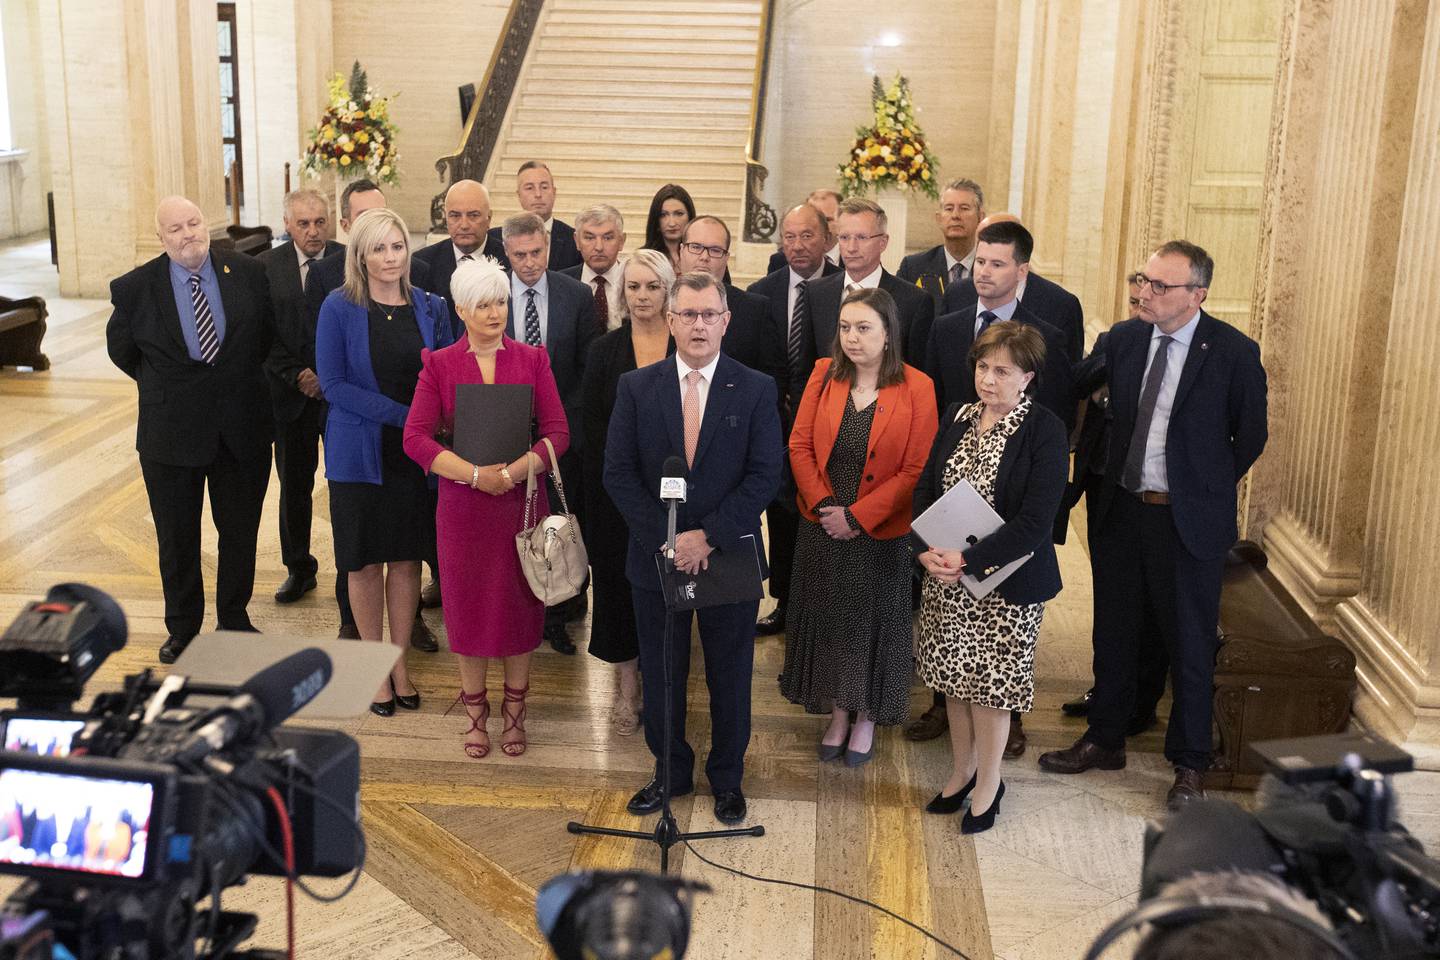 DUP Leader Sir Jeffrey Donaldson with party colleagues speaking in the Great Hall of Parliament Buildings at Stormont. PA